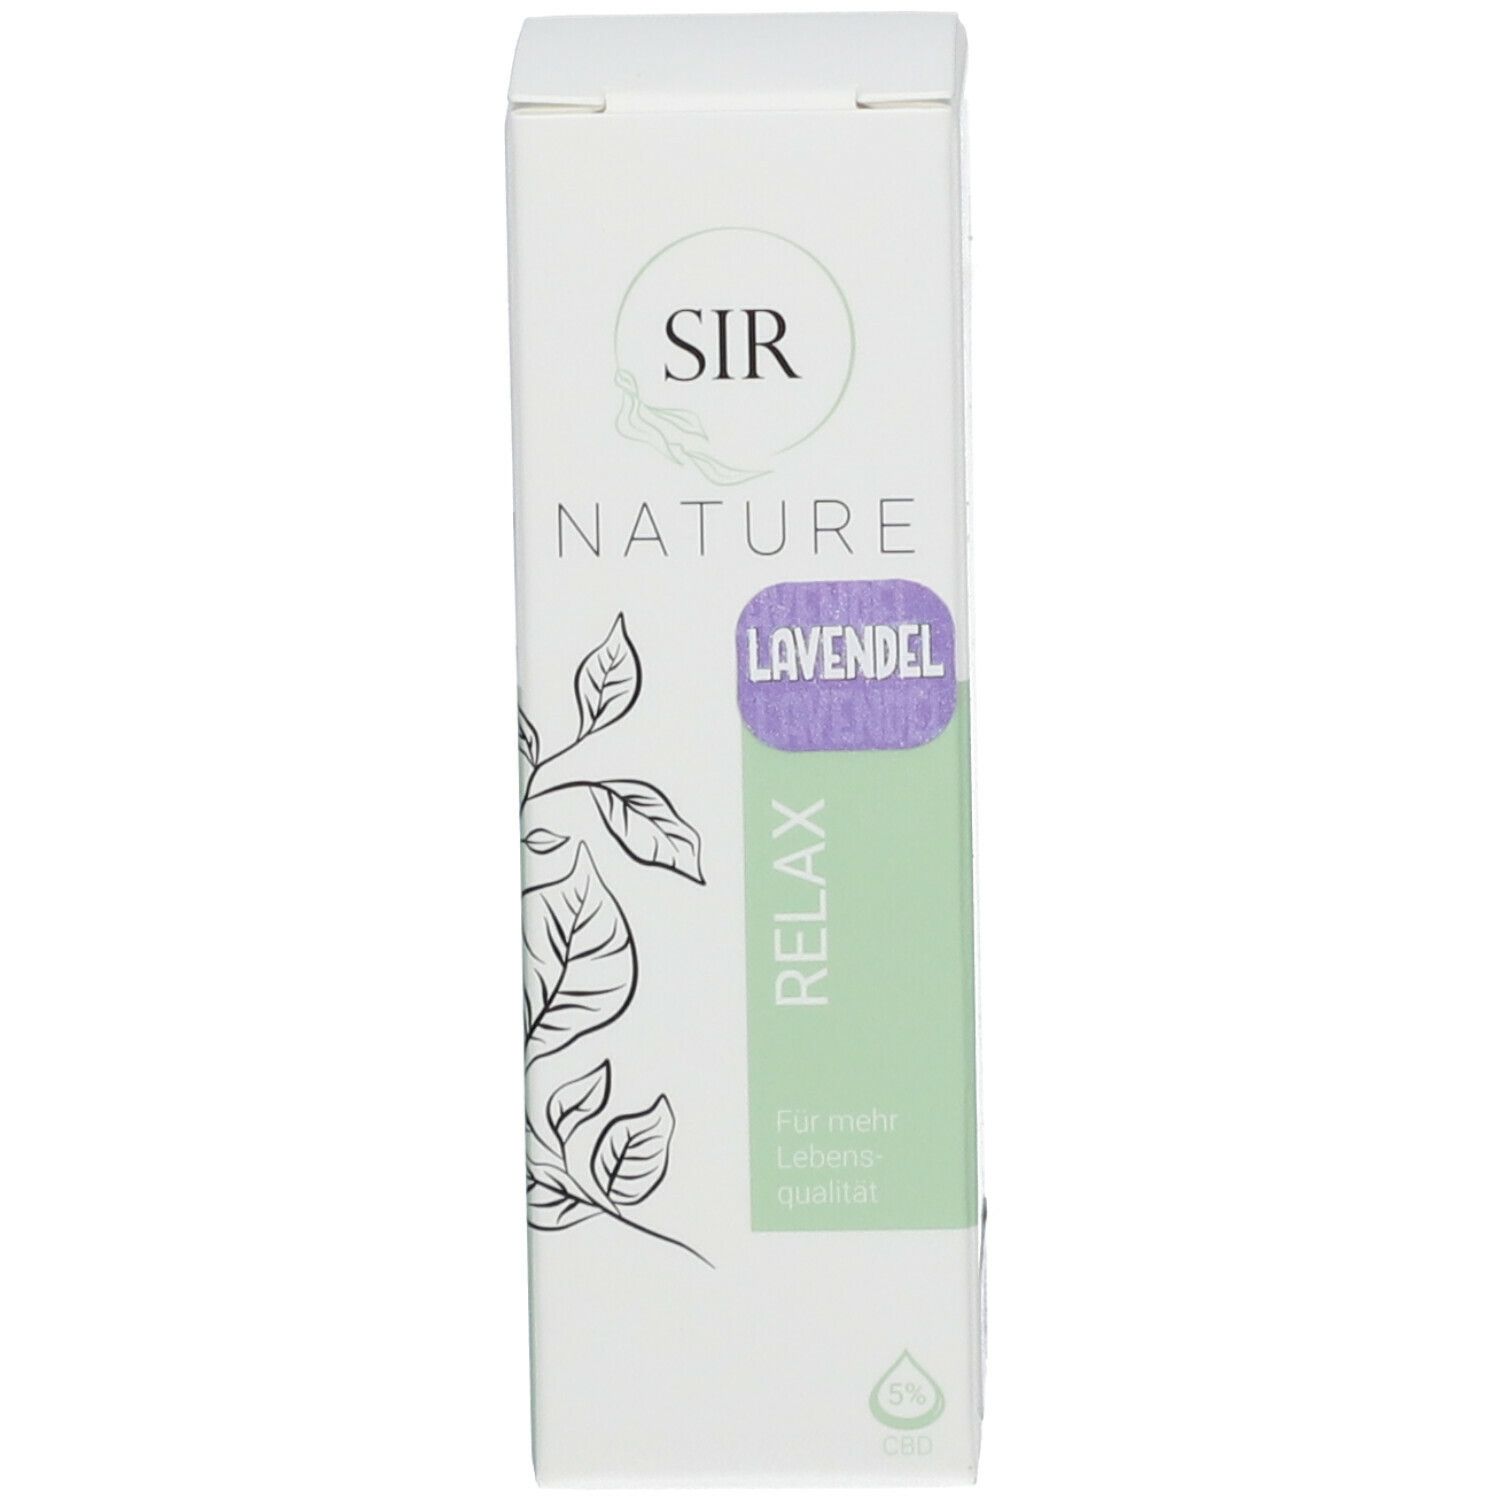 SIR NATURE Relax Lavendel 5 %